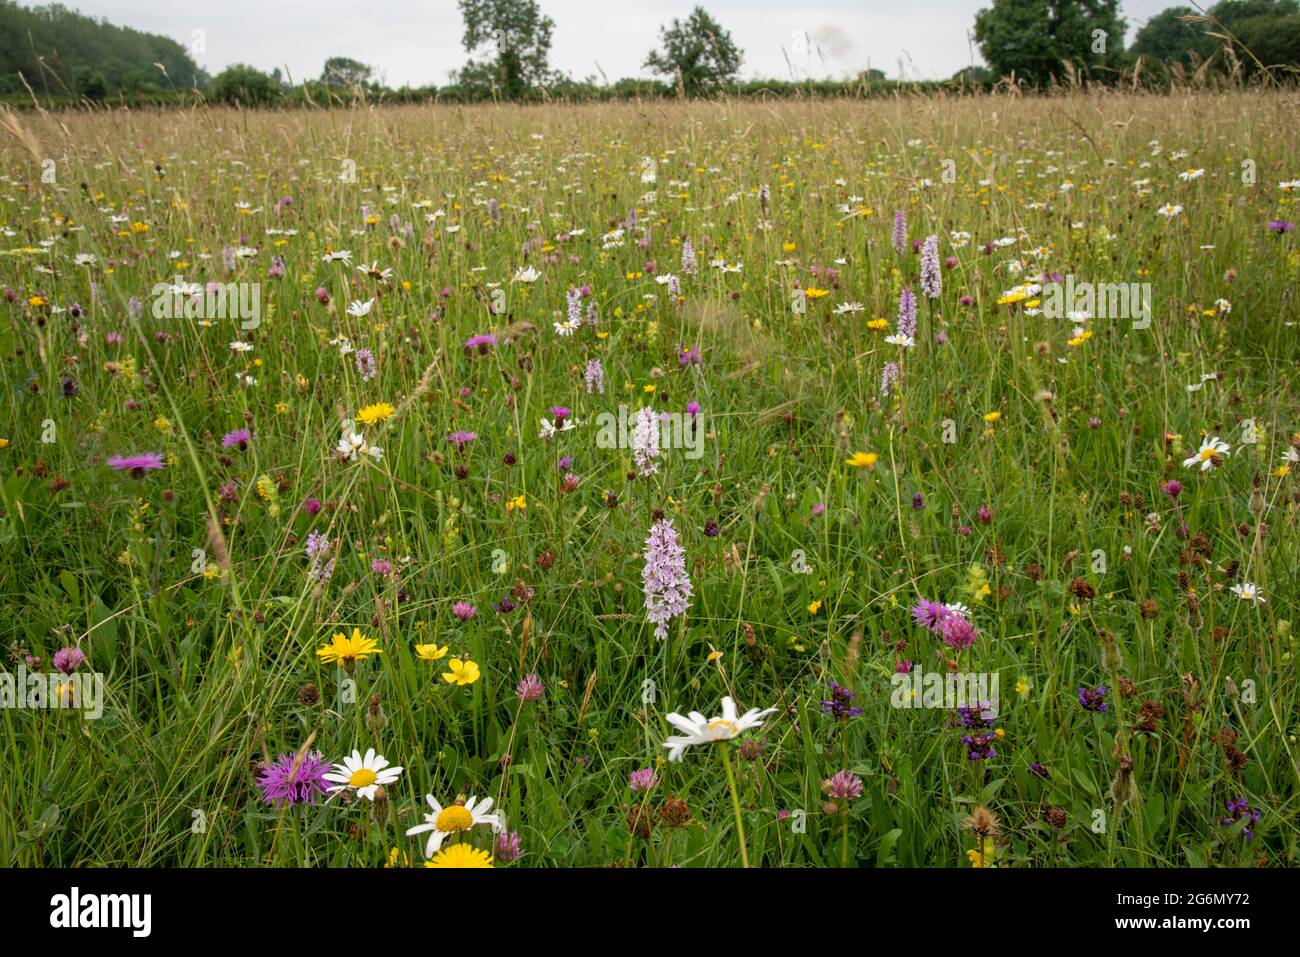 Clattinger Farm, Wiltshire, England.  A Special Area of Conservation and SSSI due to its wild flowers.  Owned by Wiltshire Wildlife Trust. Stock Photo